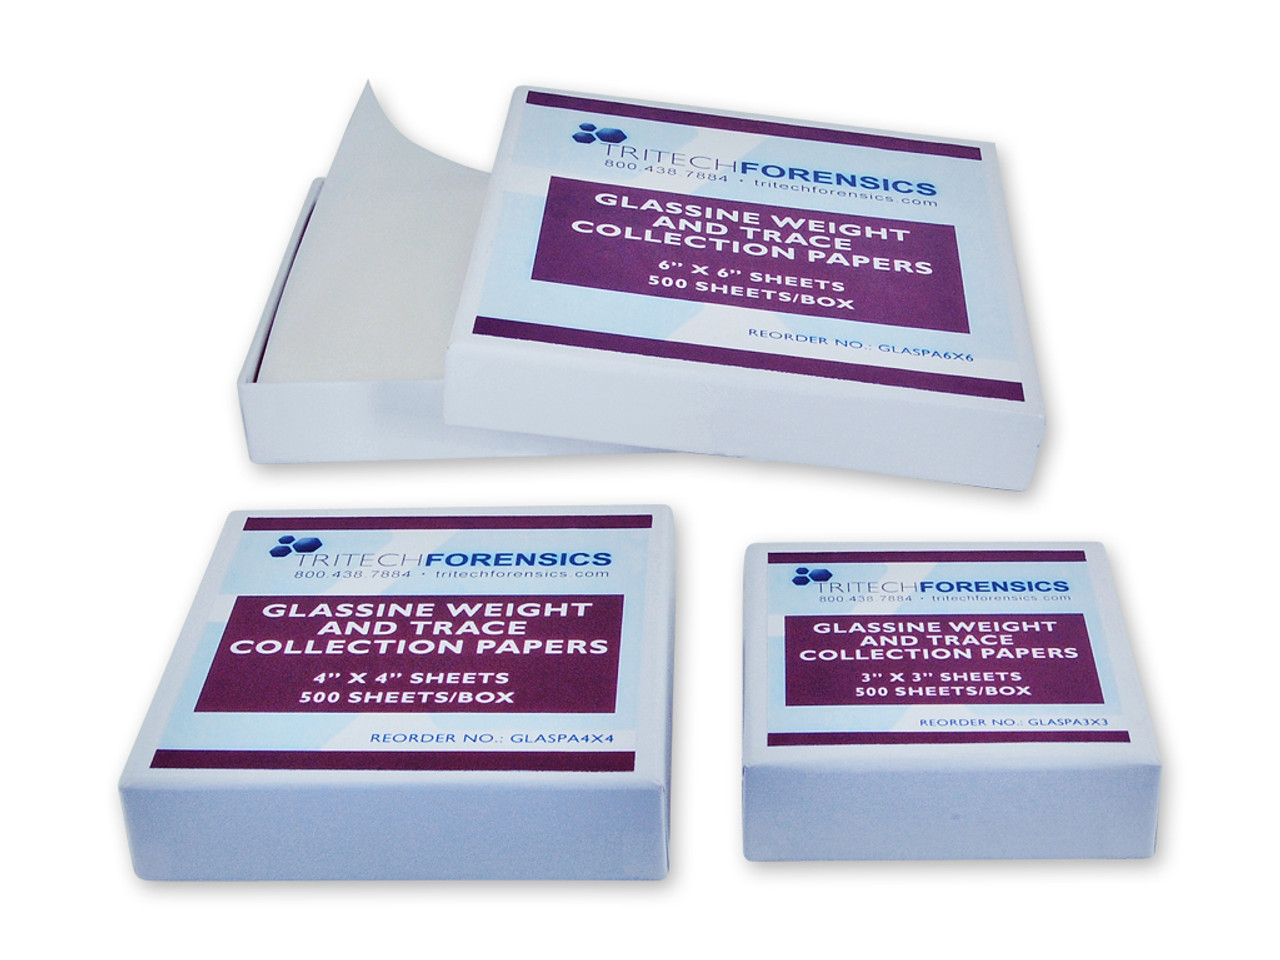 Glassine Weigh and Trace Paper (500 sheets/box)